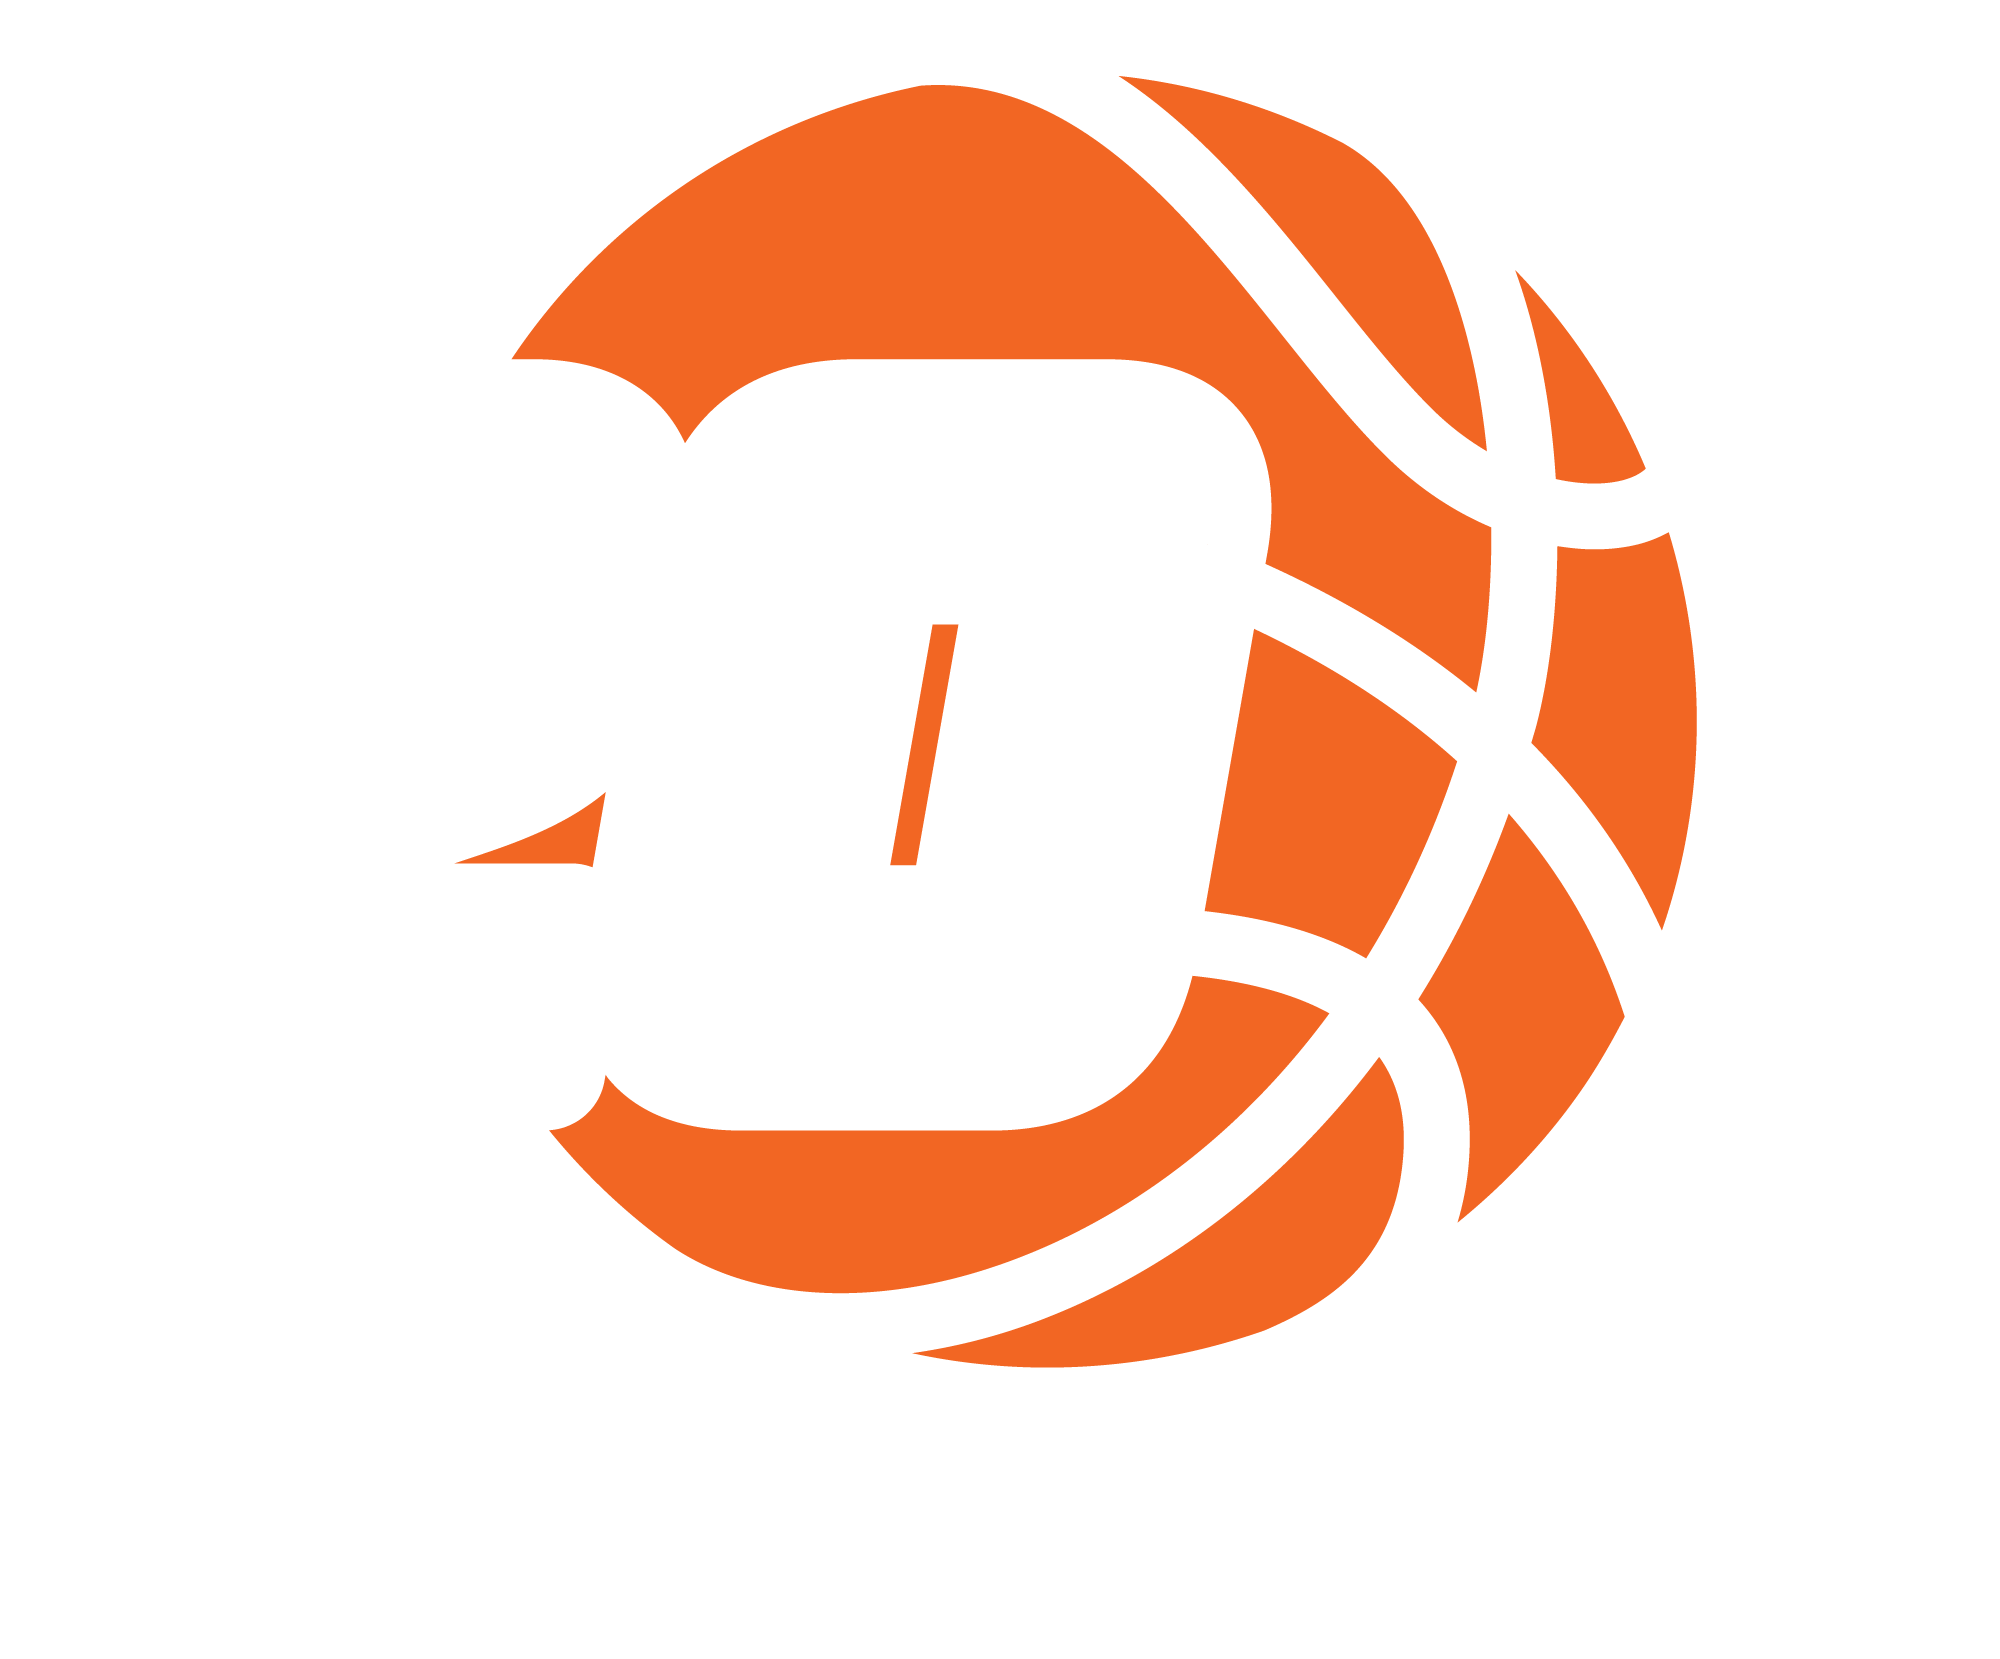 20 Years of Innovation